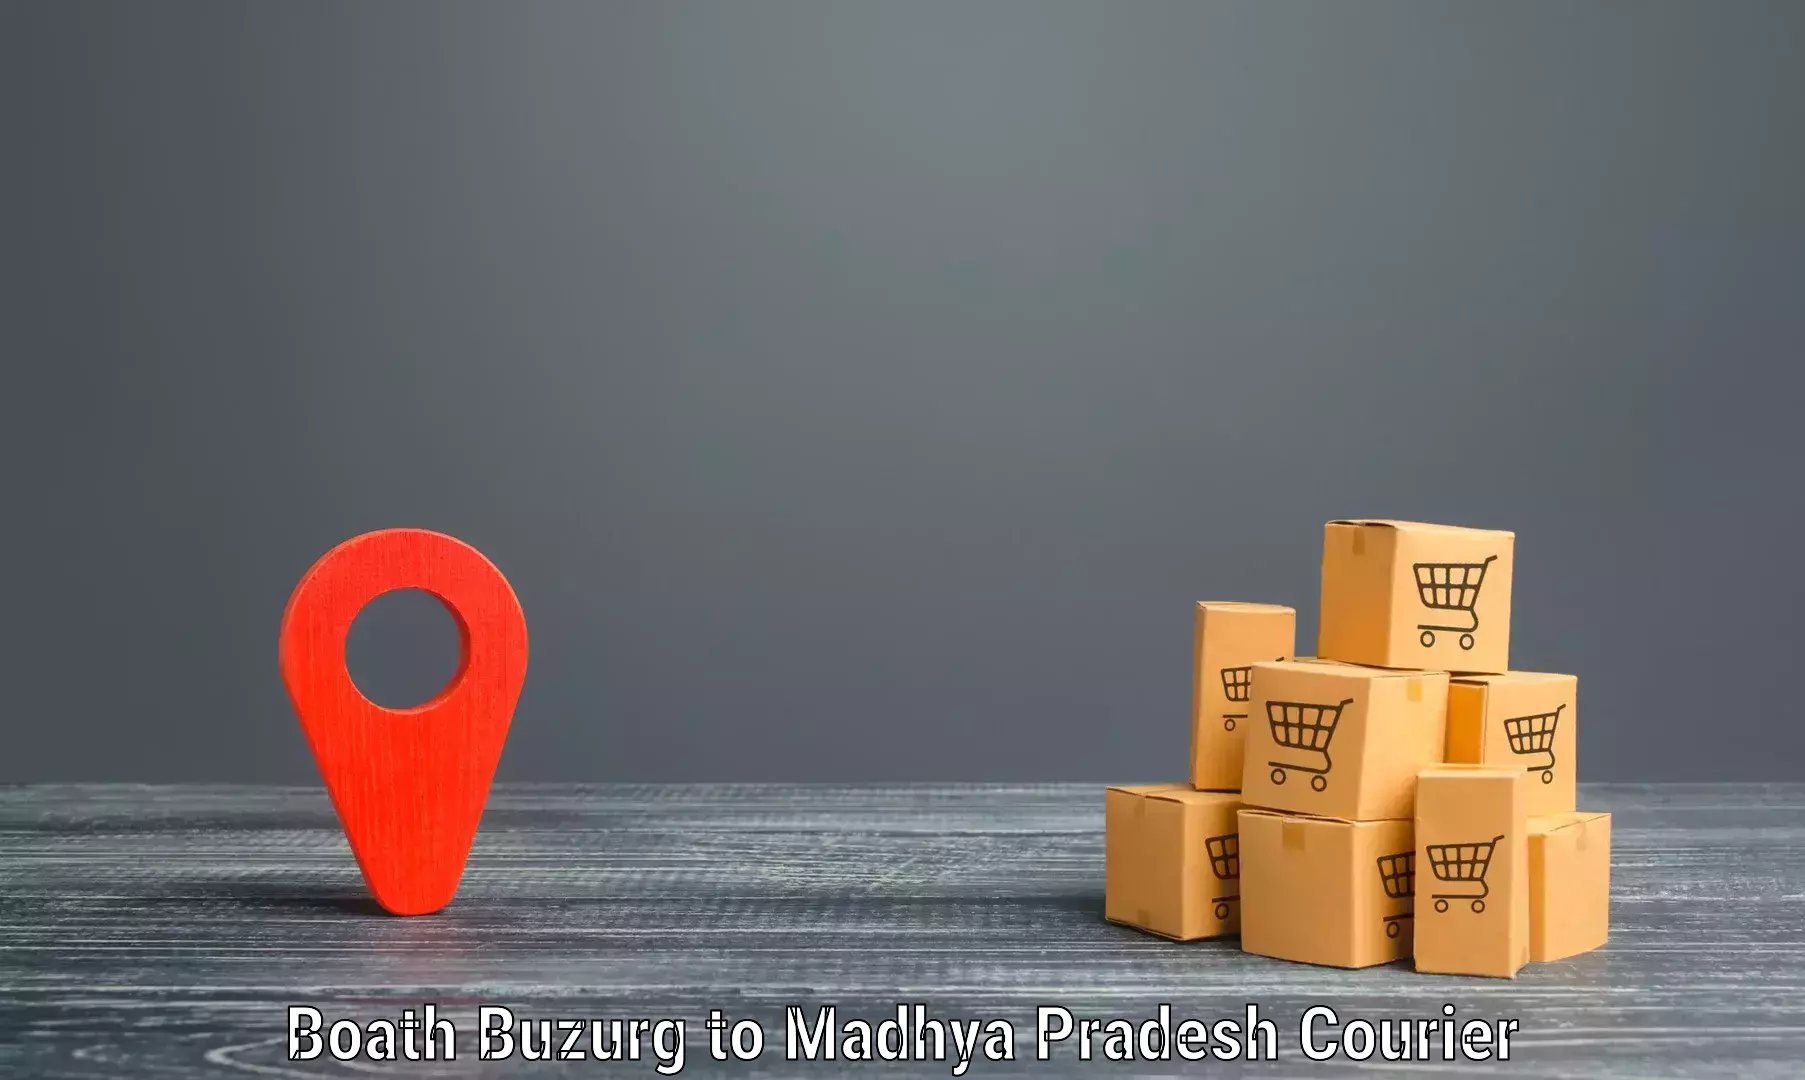 Express delivery network Boath Buzurg to Mandideep